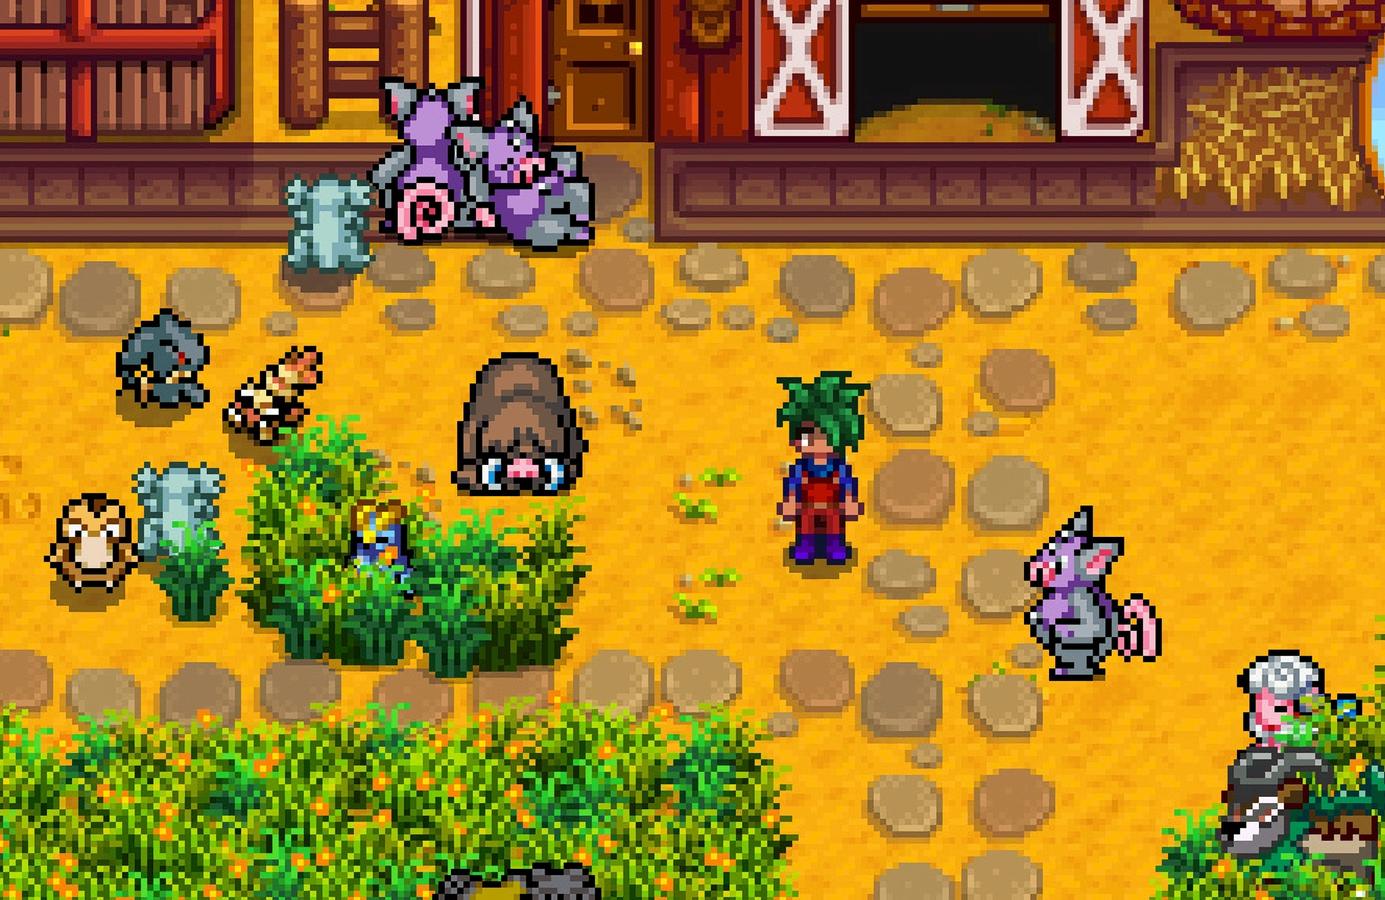 An image of Pokemon in Stardew Valley.